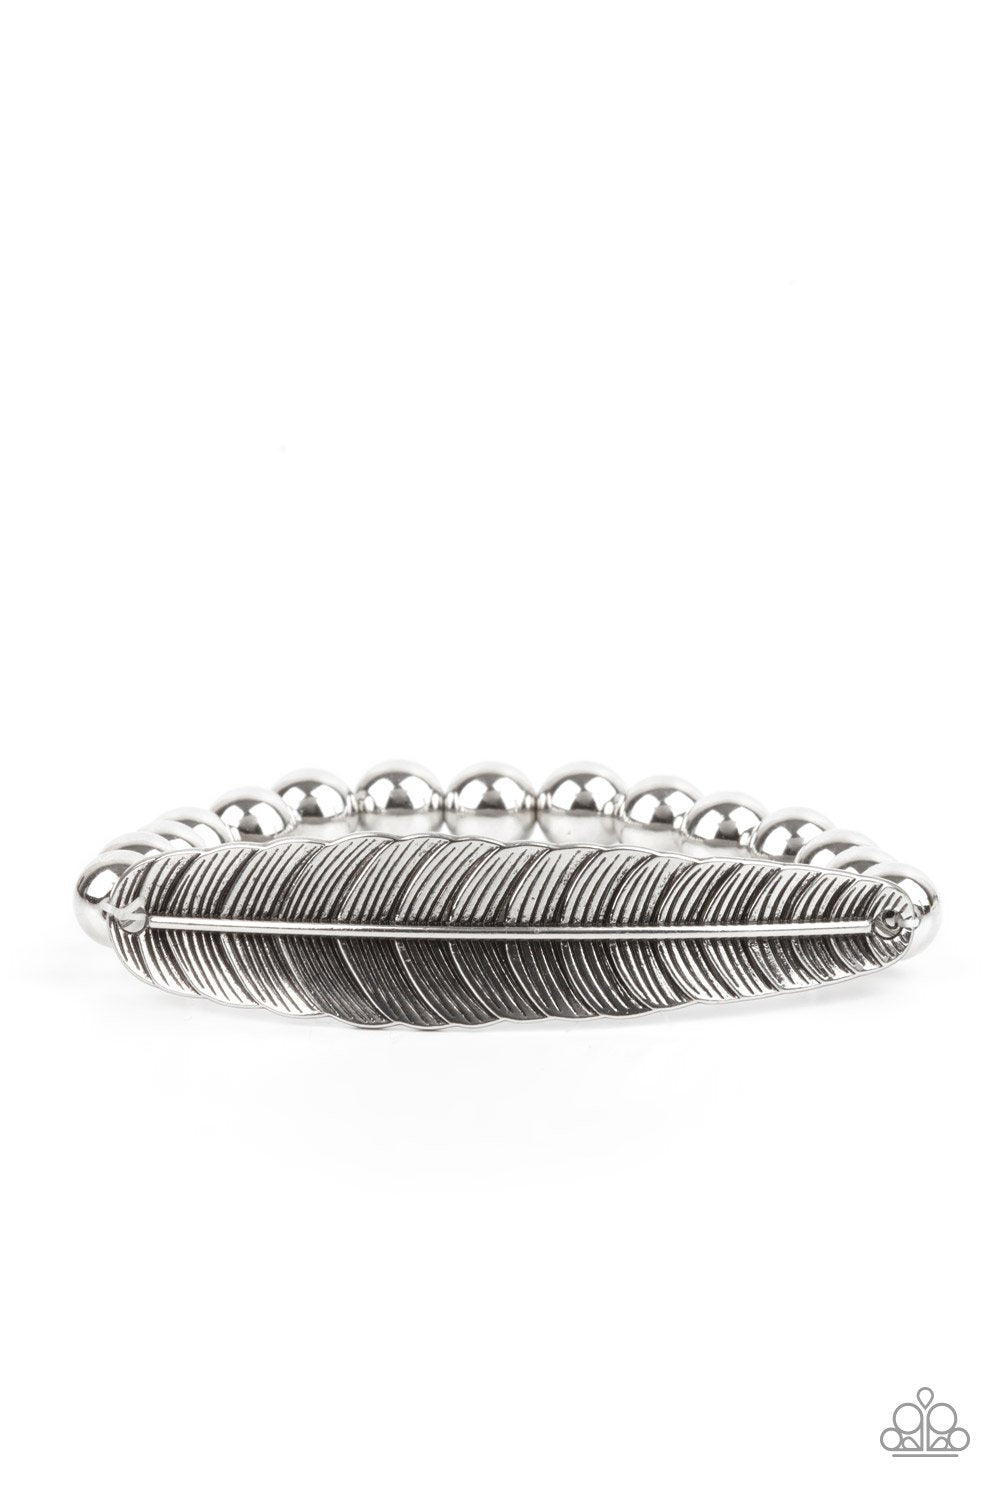 Featherlight Fashion Silver Feather Bracelet - Paparazzi Accessories- lightbox - CarasShop.com - $5 Jewelry by Cara Jewels